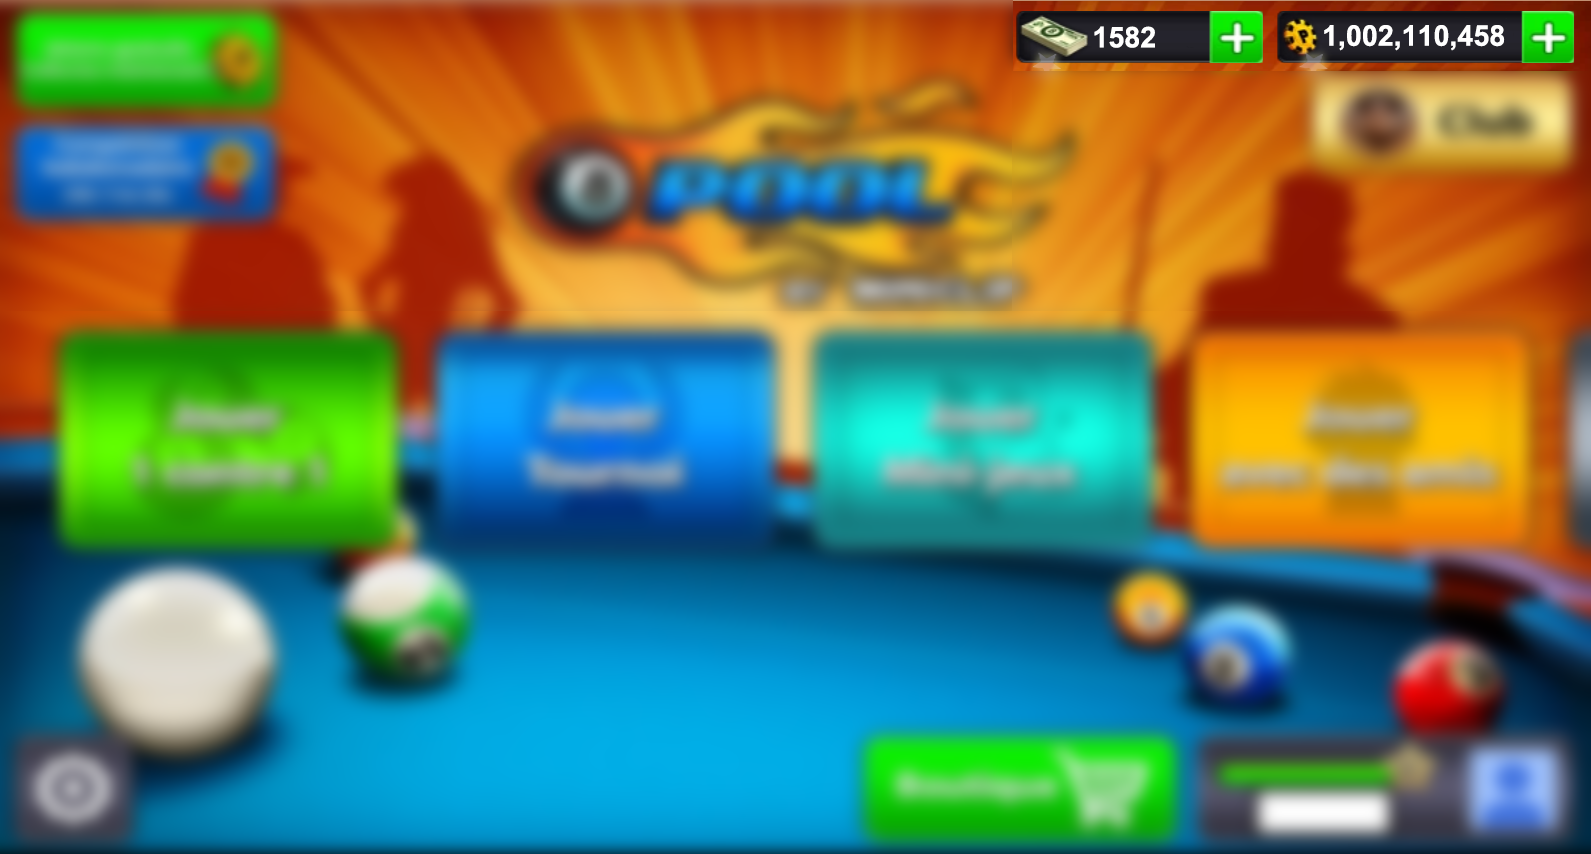 Free 8ball pool coins 1.1 APK Download - Android Tools Apps - 